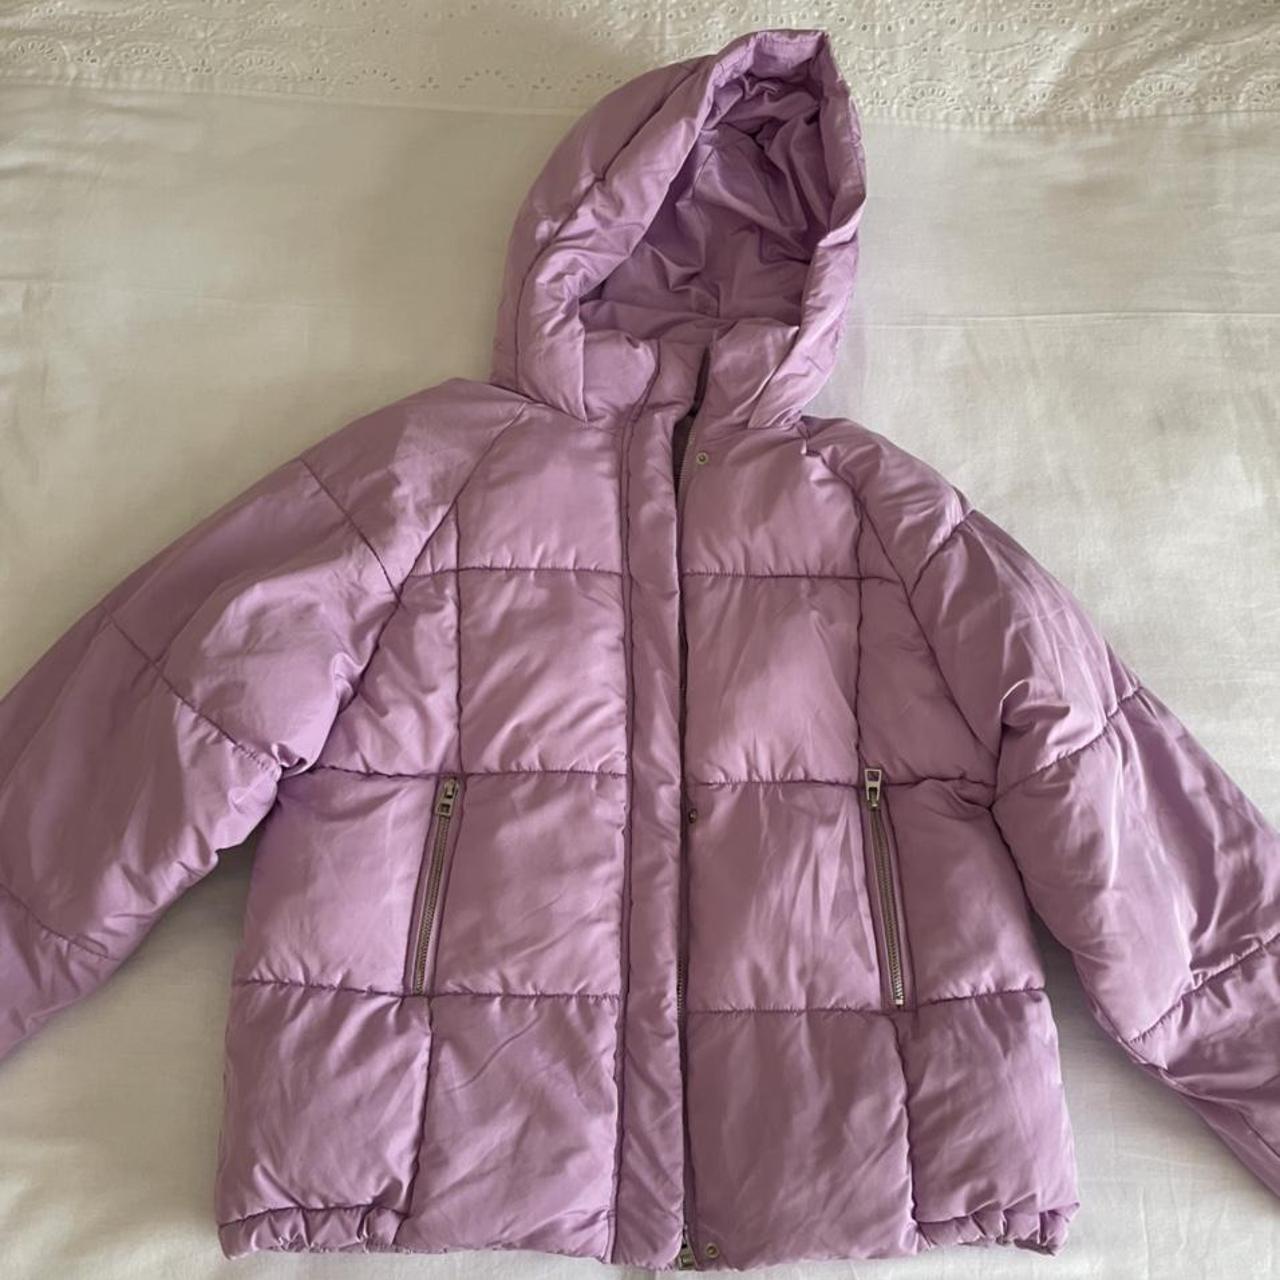 Zara Lilac Puffer Jacket perfect condition, such a... - Depop